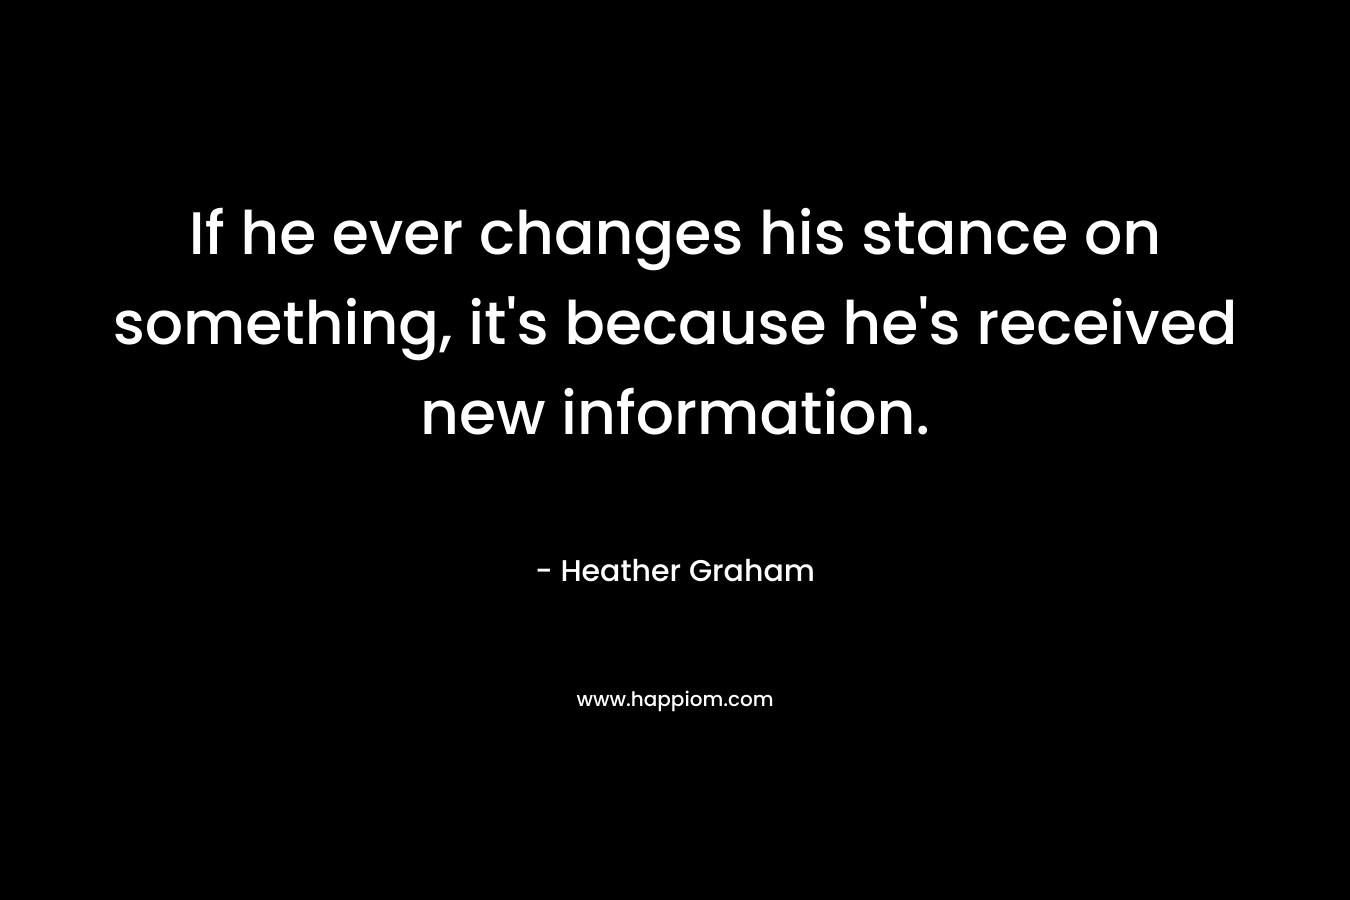 If he ever changes his stance on something, it’s because he’s received new information. – Heather Graham